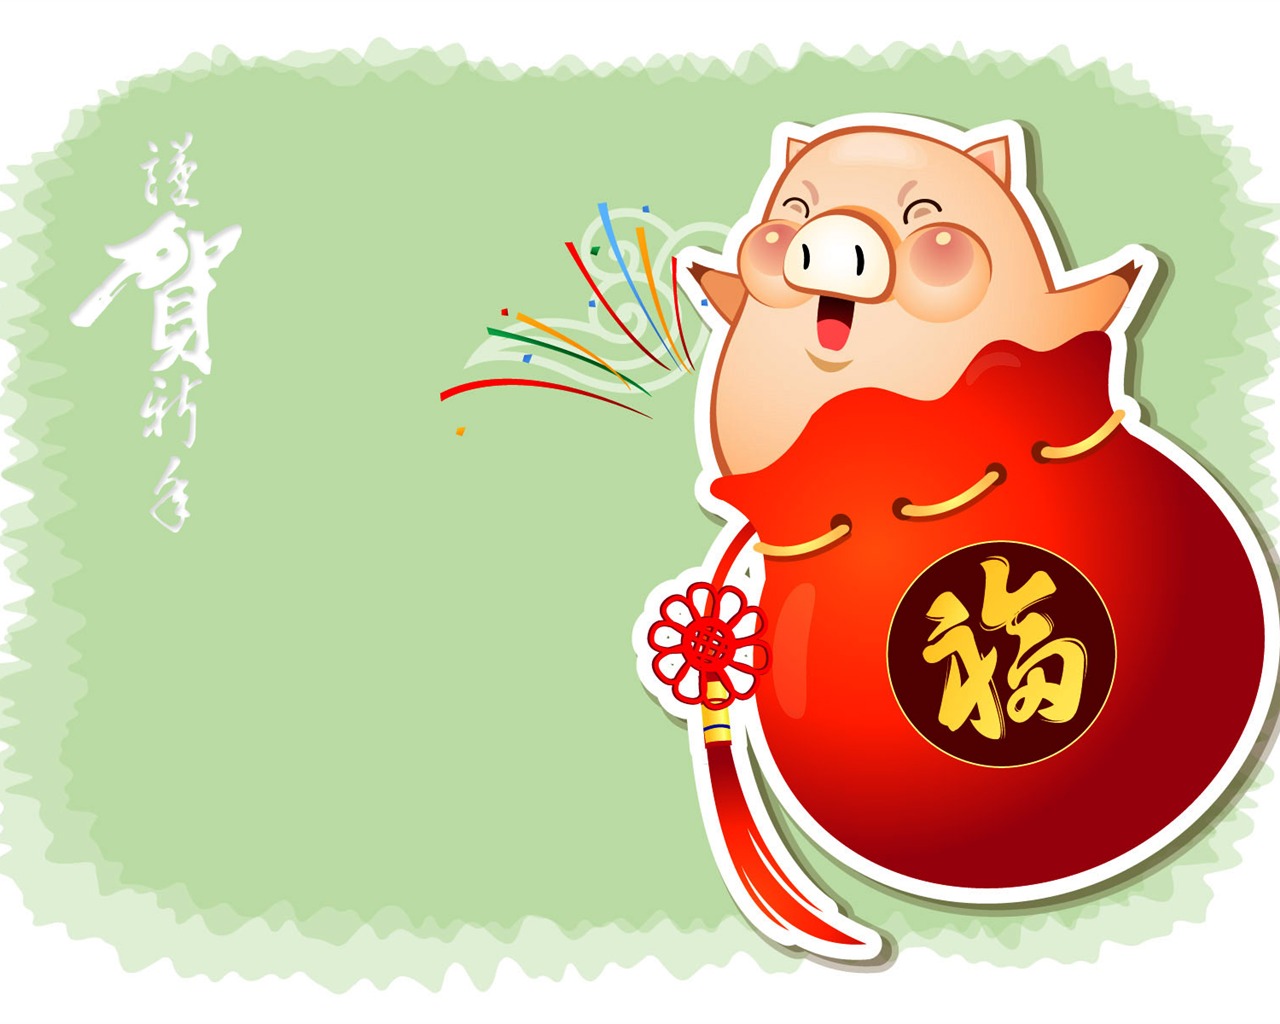 Year of the Pig Theme Wallpaper #3 - 1280x1024